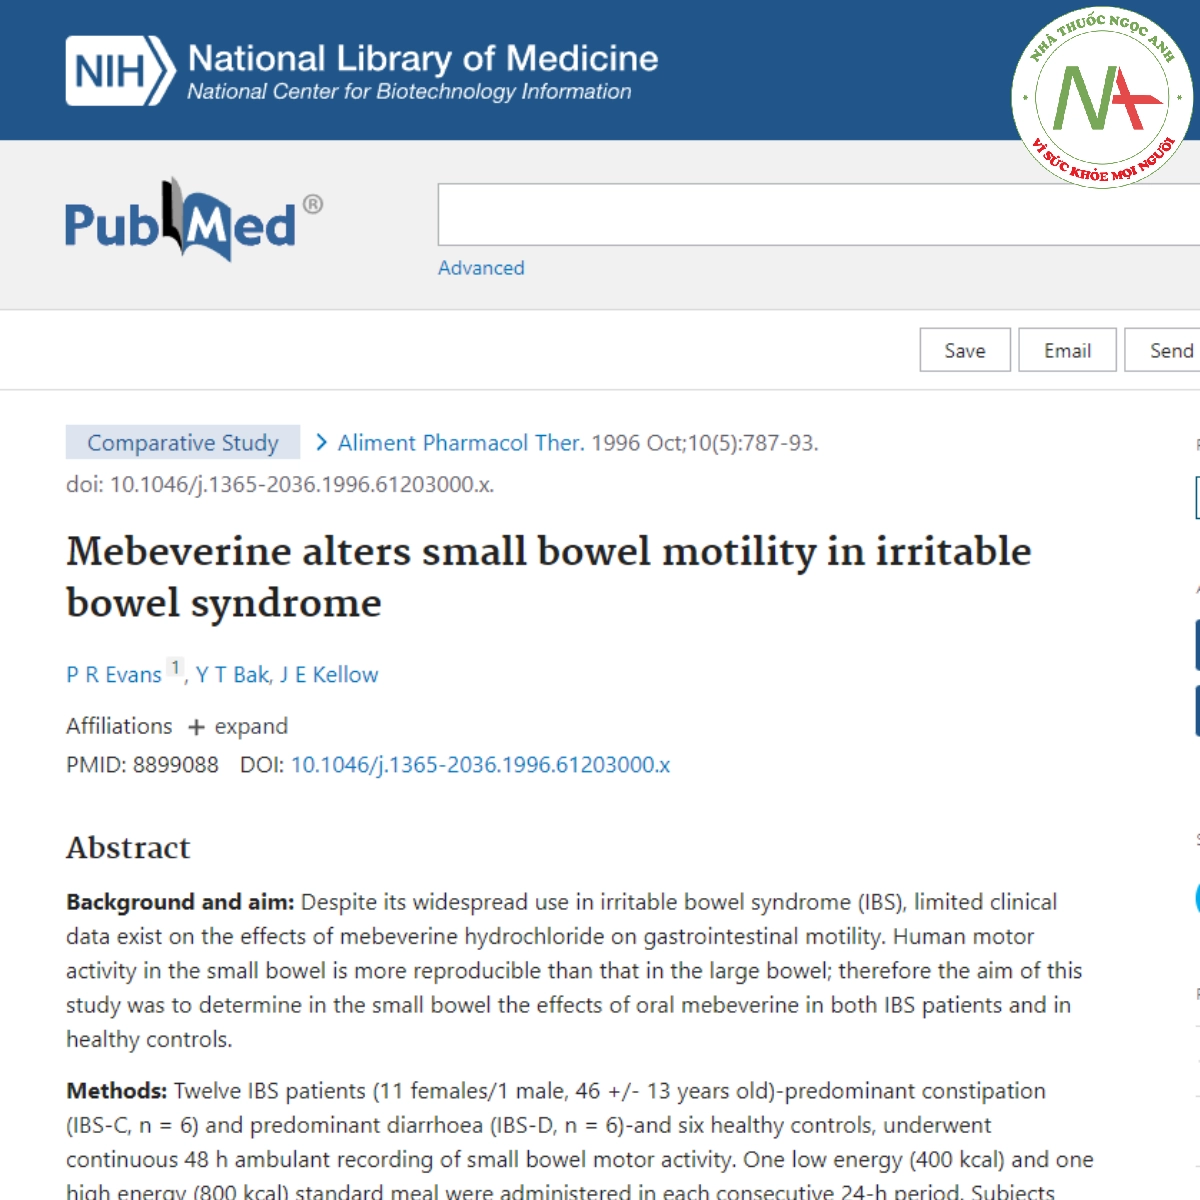 Mebeverine alters small bowel motility in irritable bowel syndrome